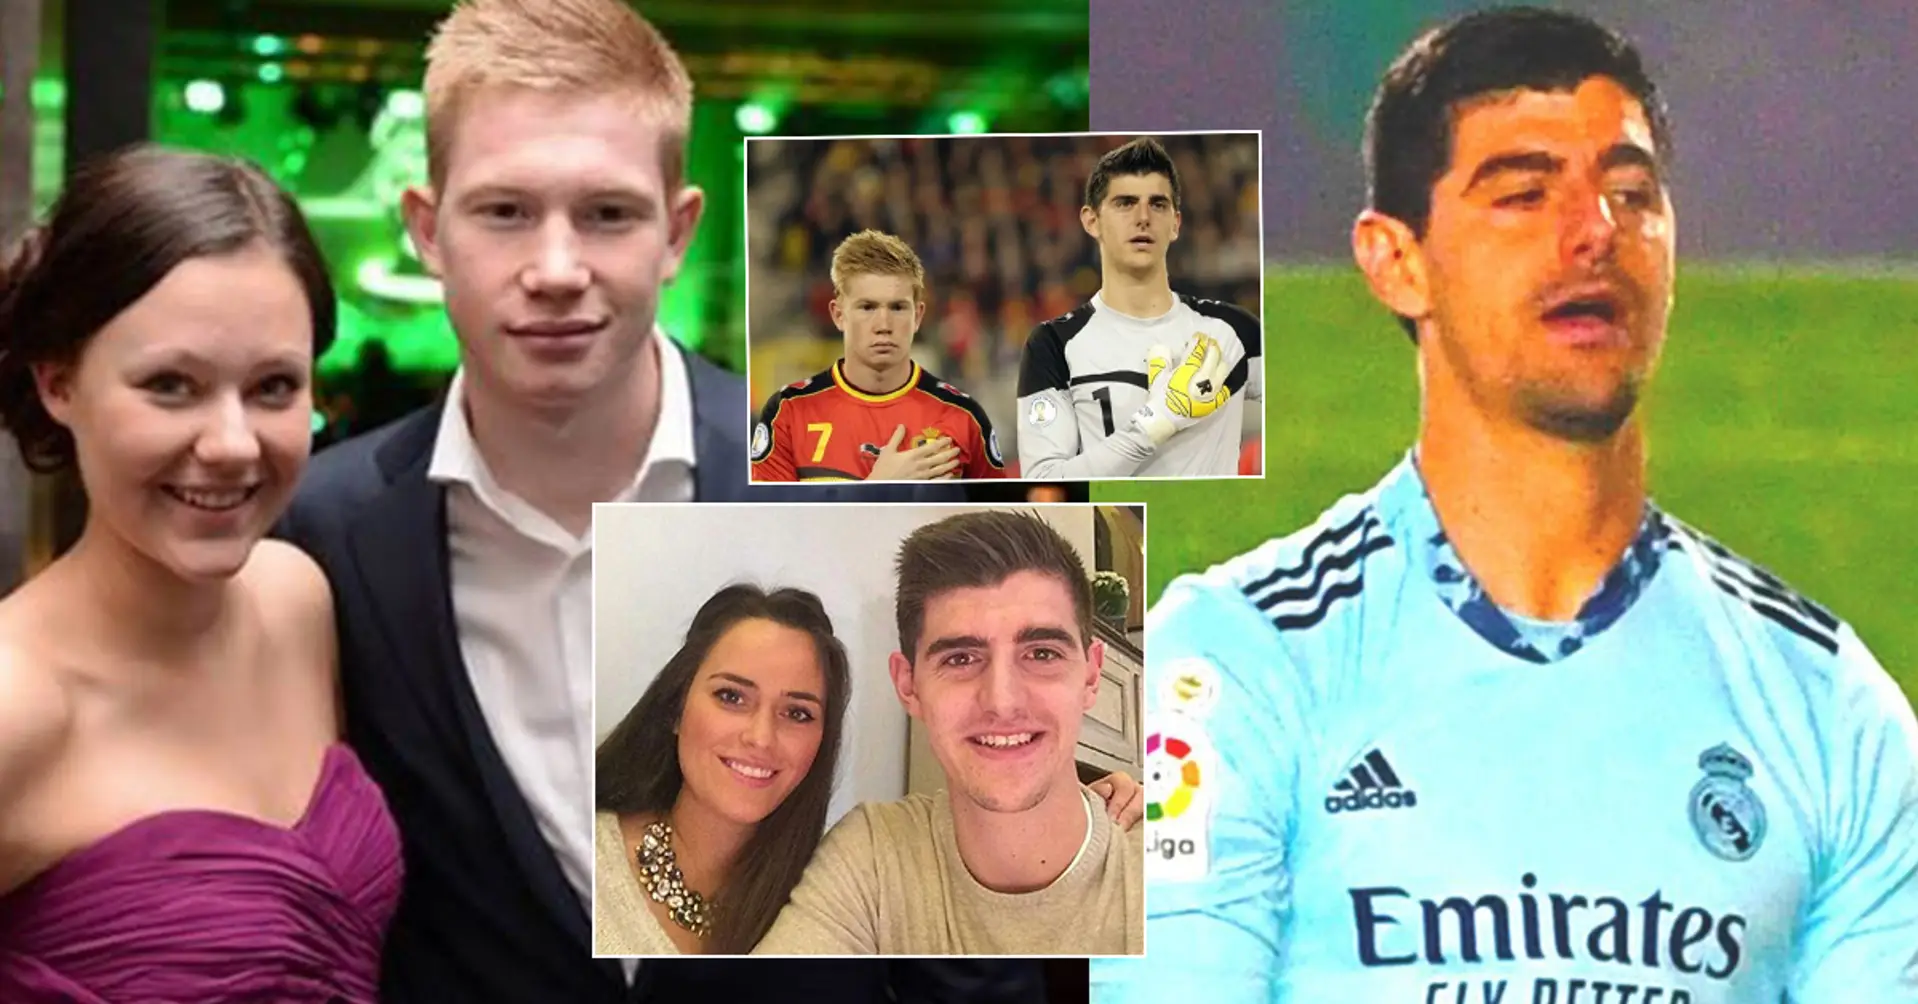 'In one night, Thibaut gave me what I missed with Kevin for years'. Truth behind 'hatred' between De Bruyne and Courtois